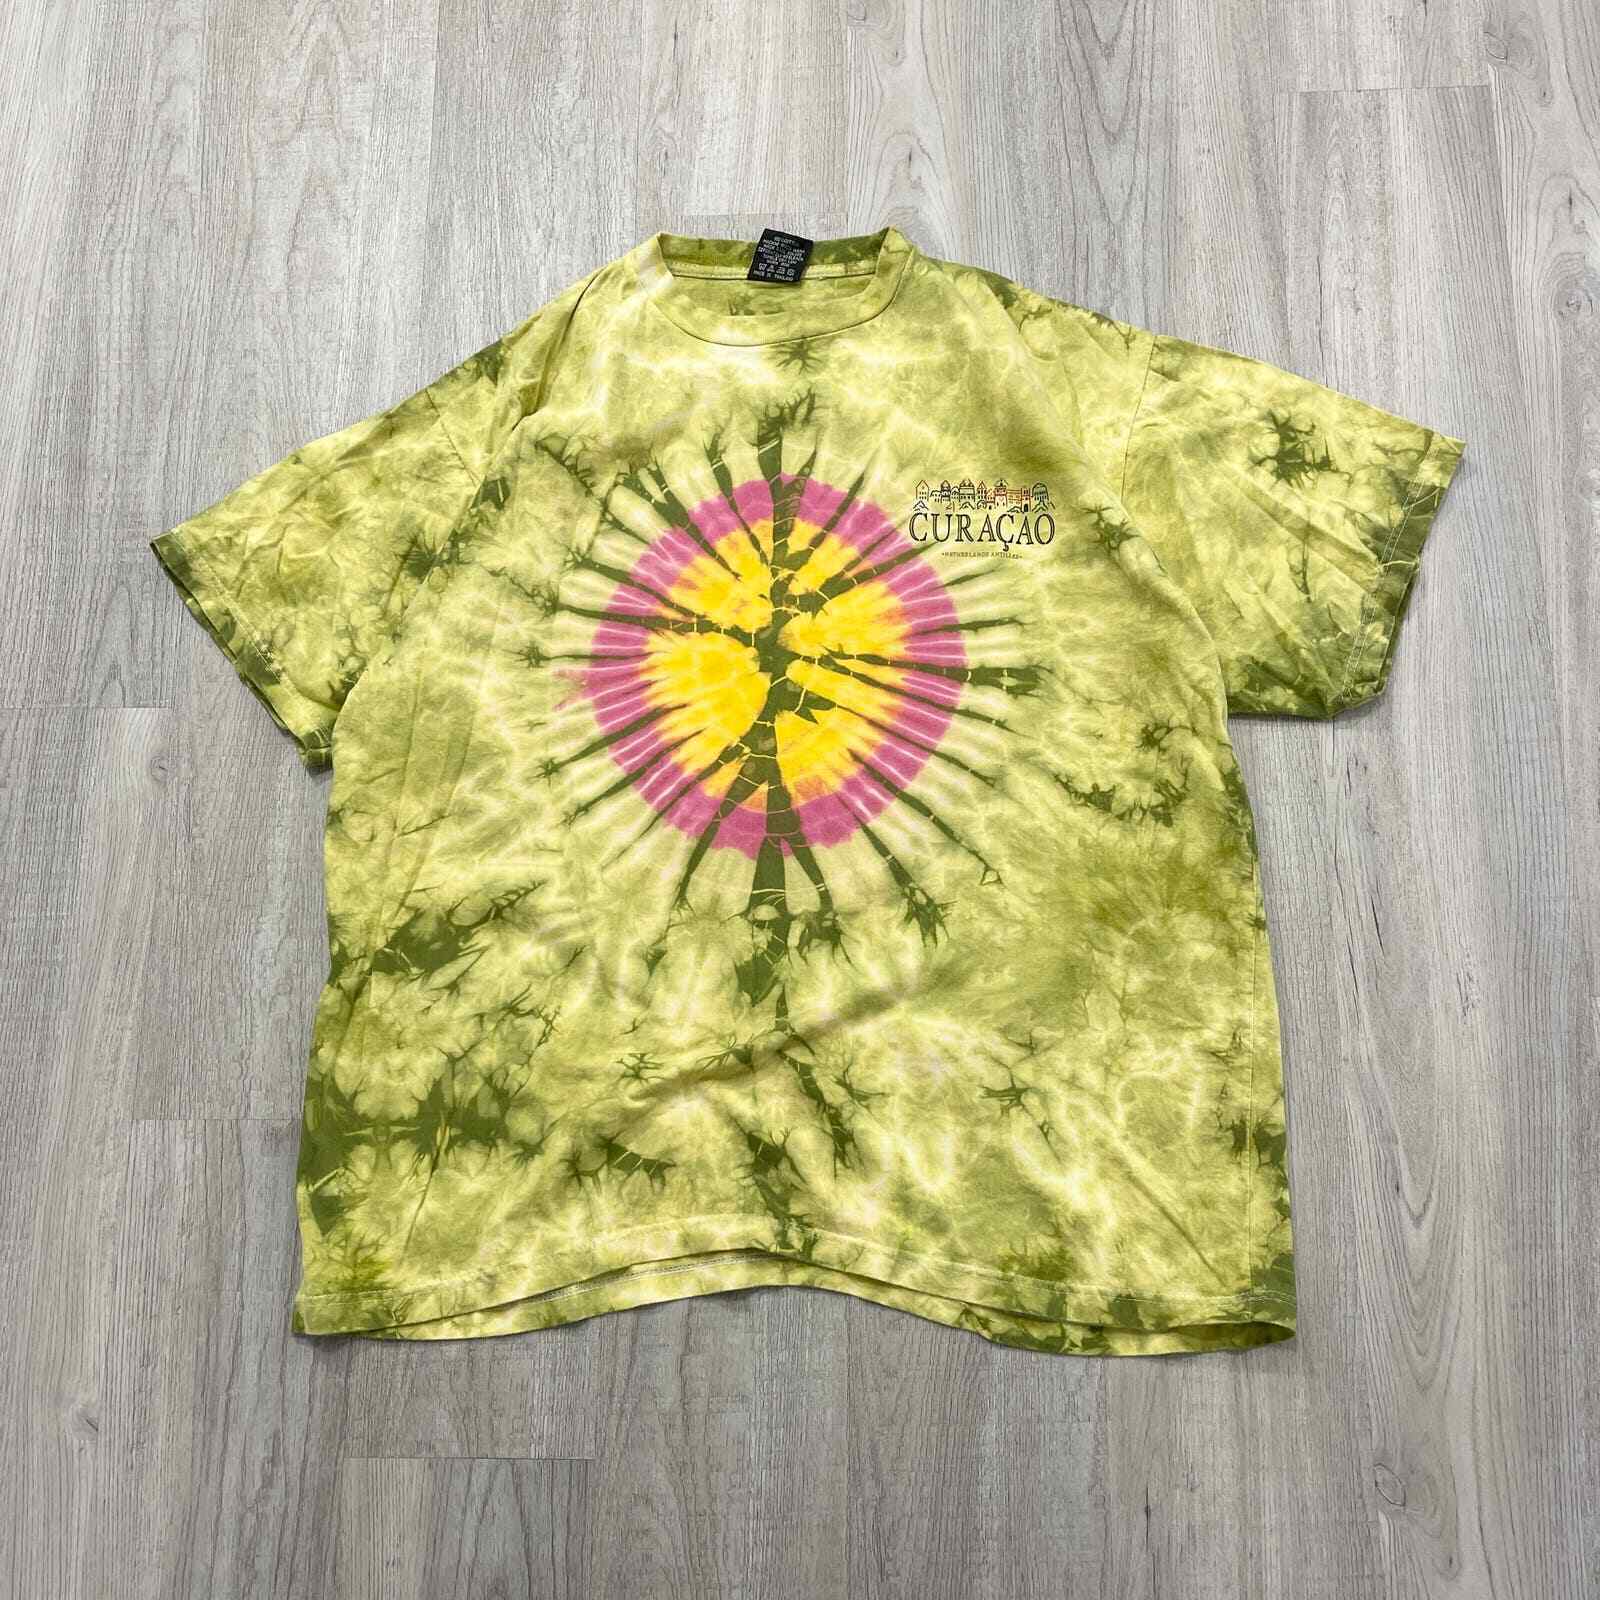 VINTAGE 90s Tie Dye Curacao Netherlands Antilles Shirt Size Extra Large XL 